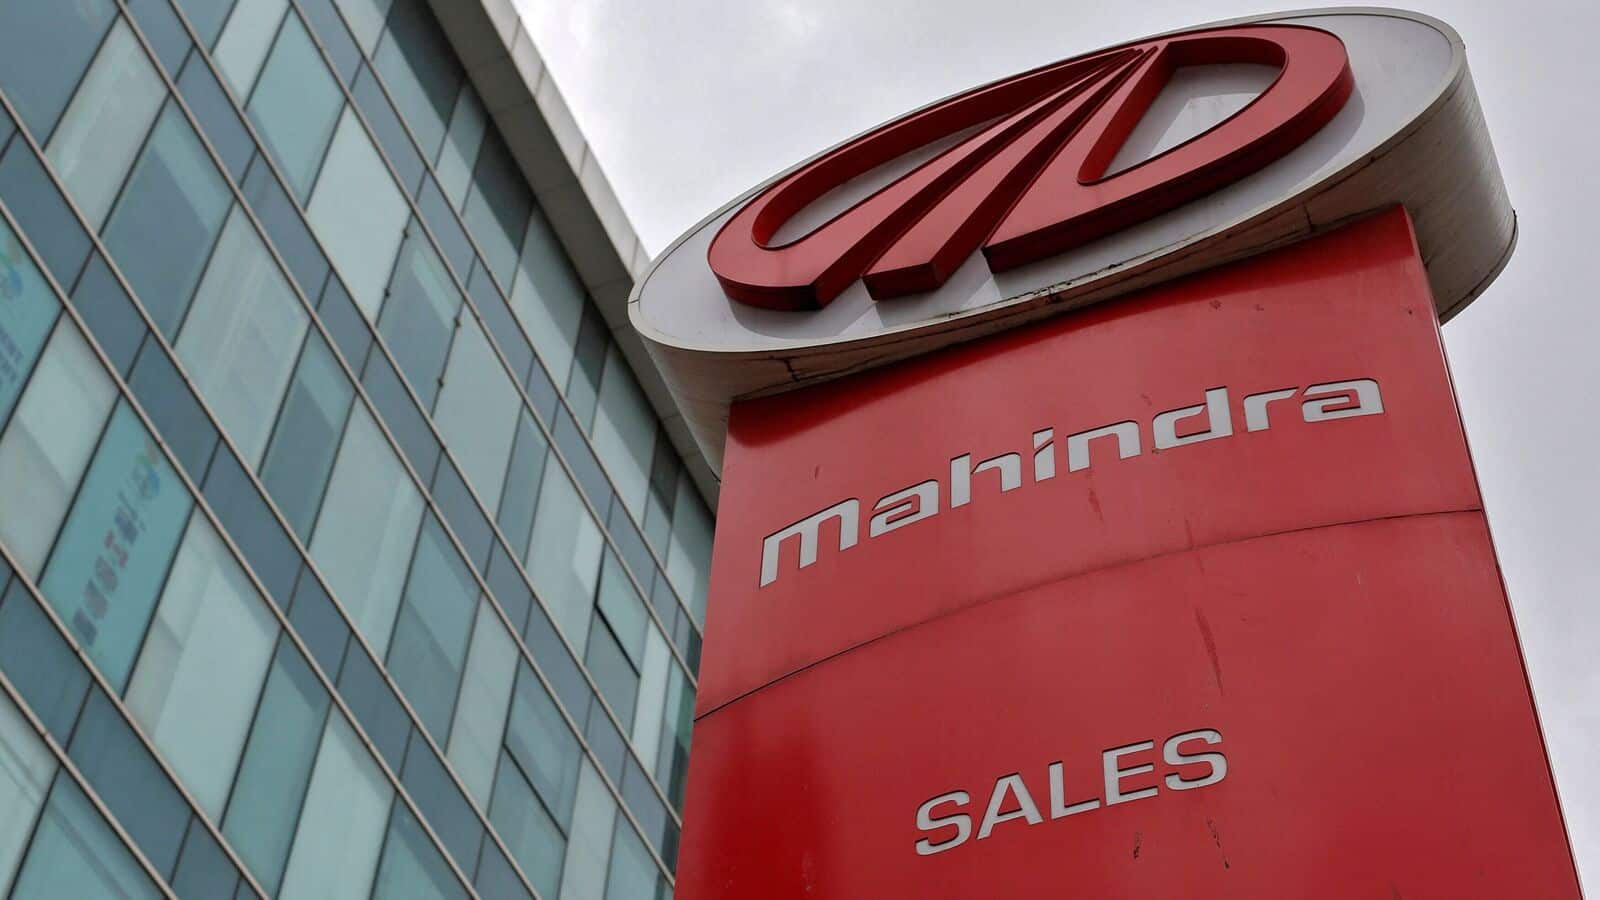 Mahindra briefly surpasses Tata Motors as India's second-largest automaker